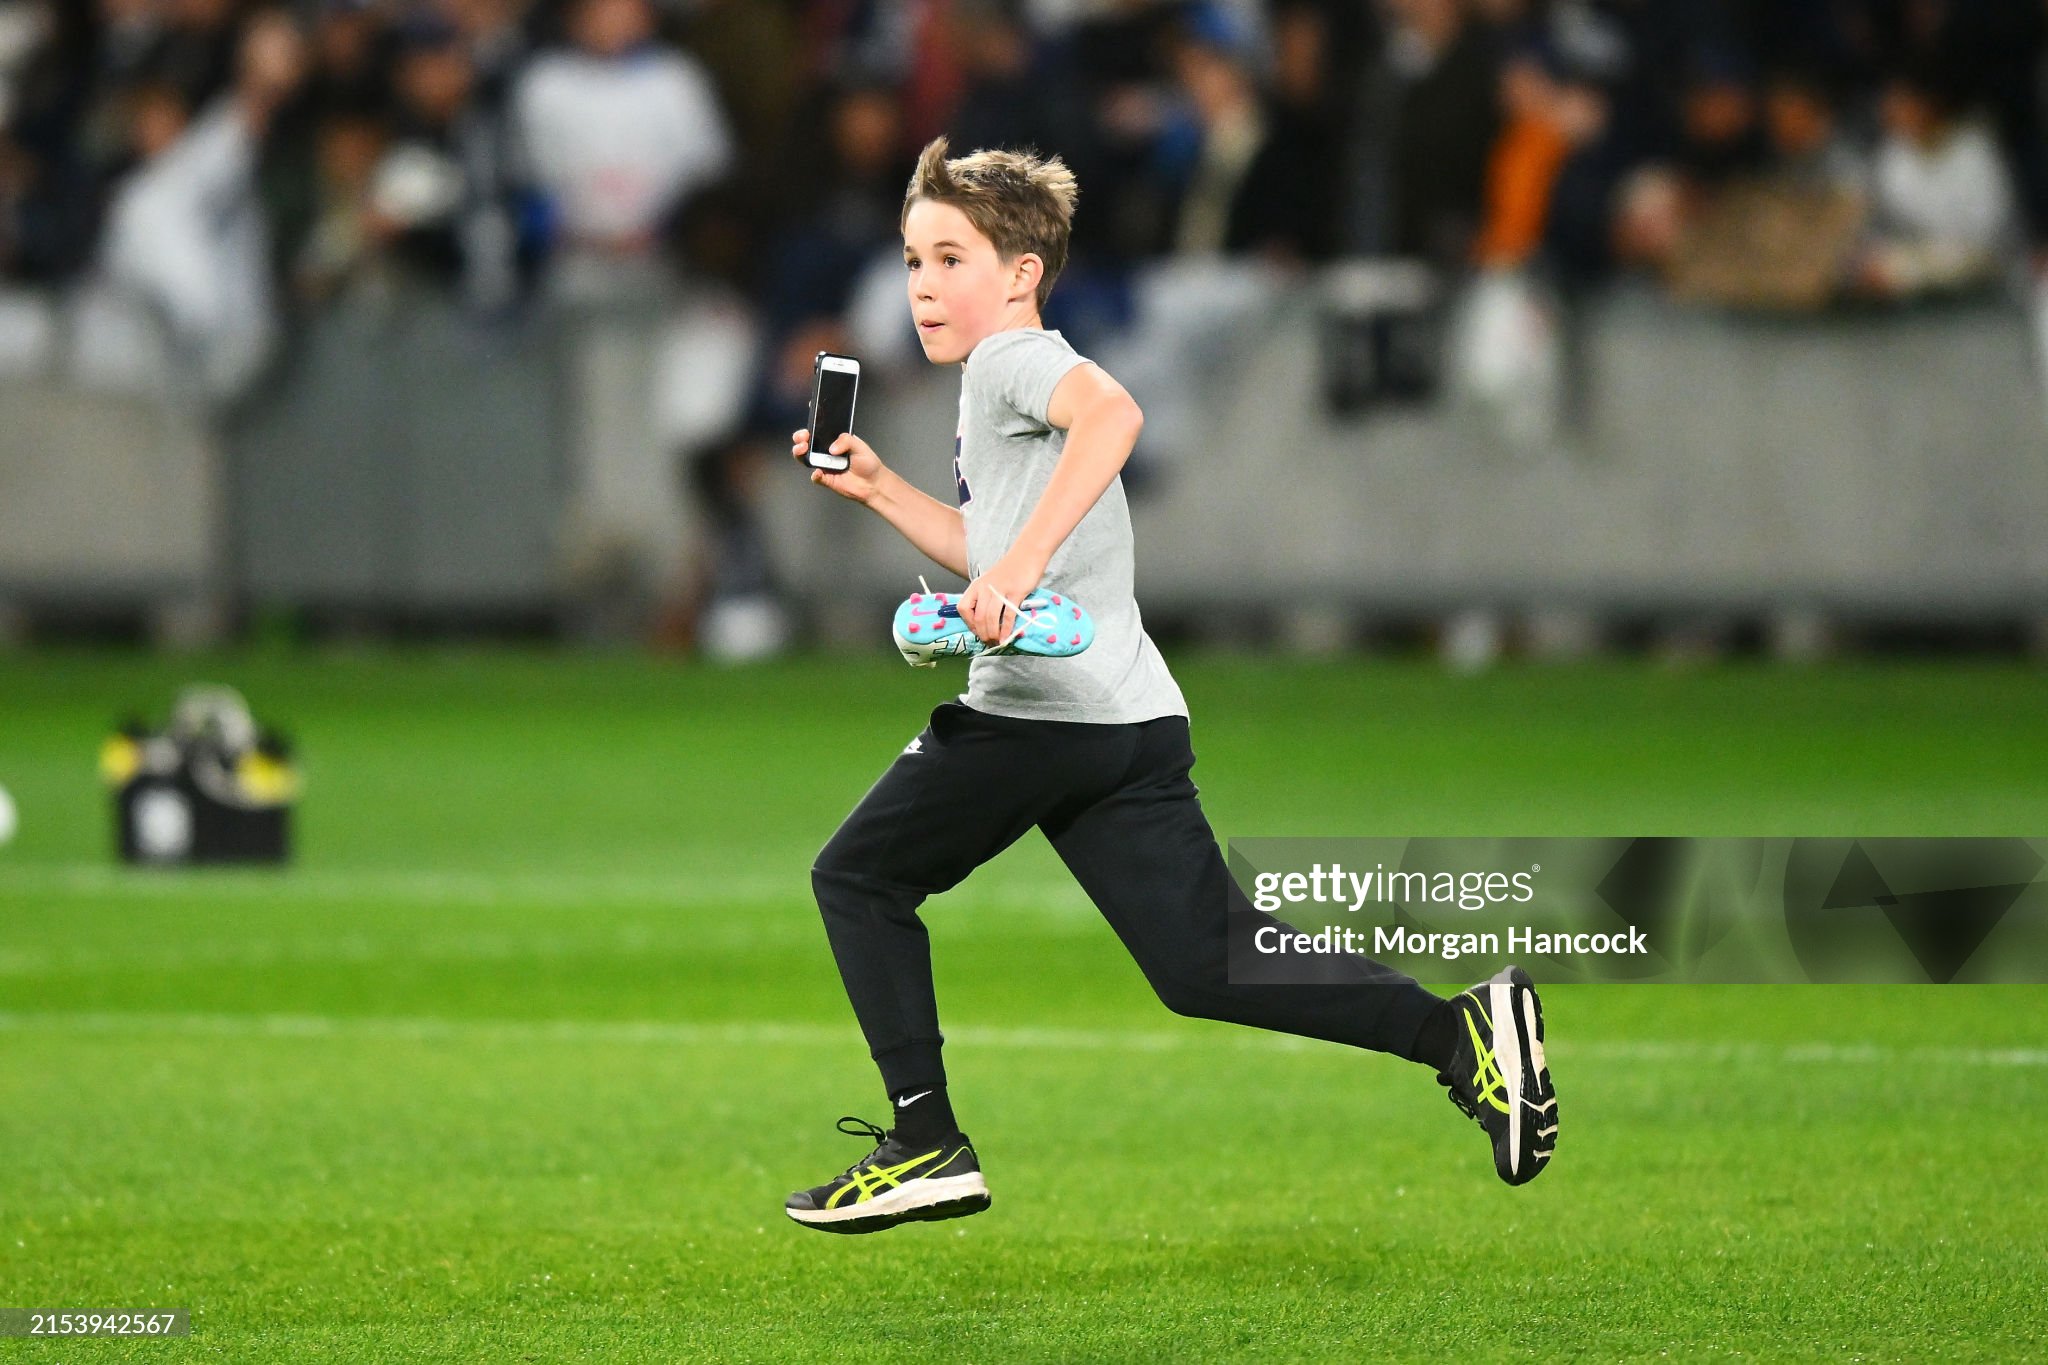 gettyimages-2153942567-2048x2048.jpg